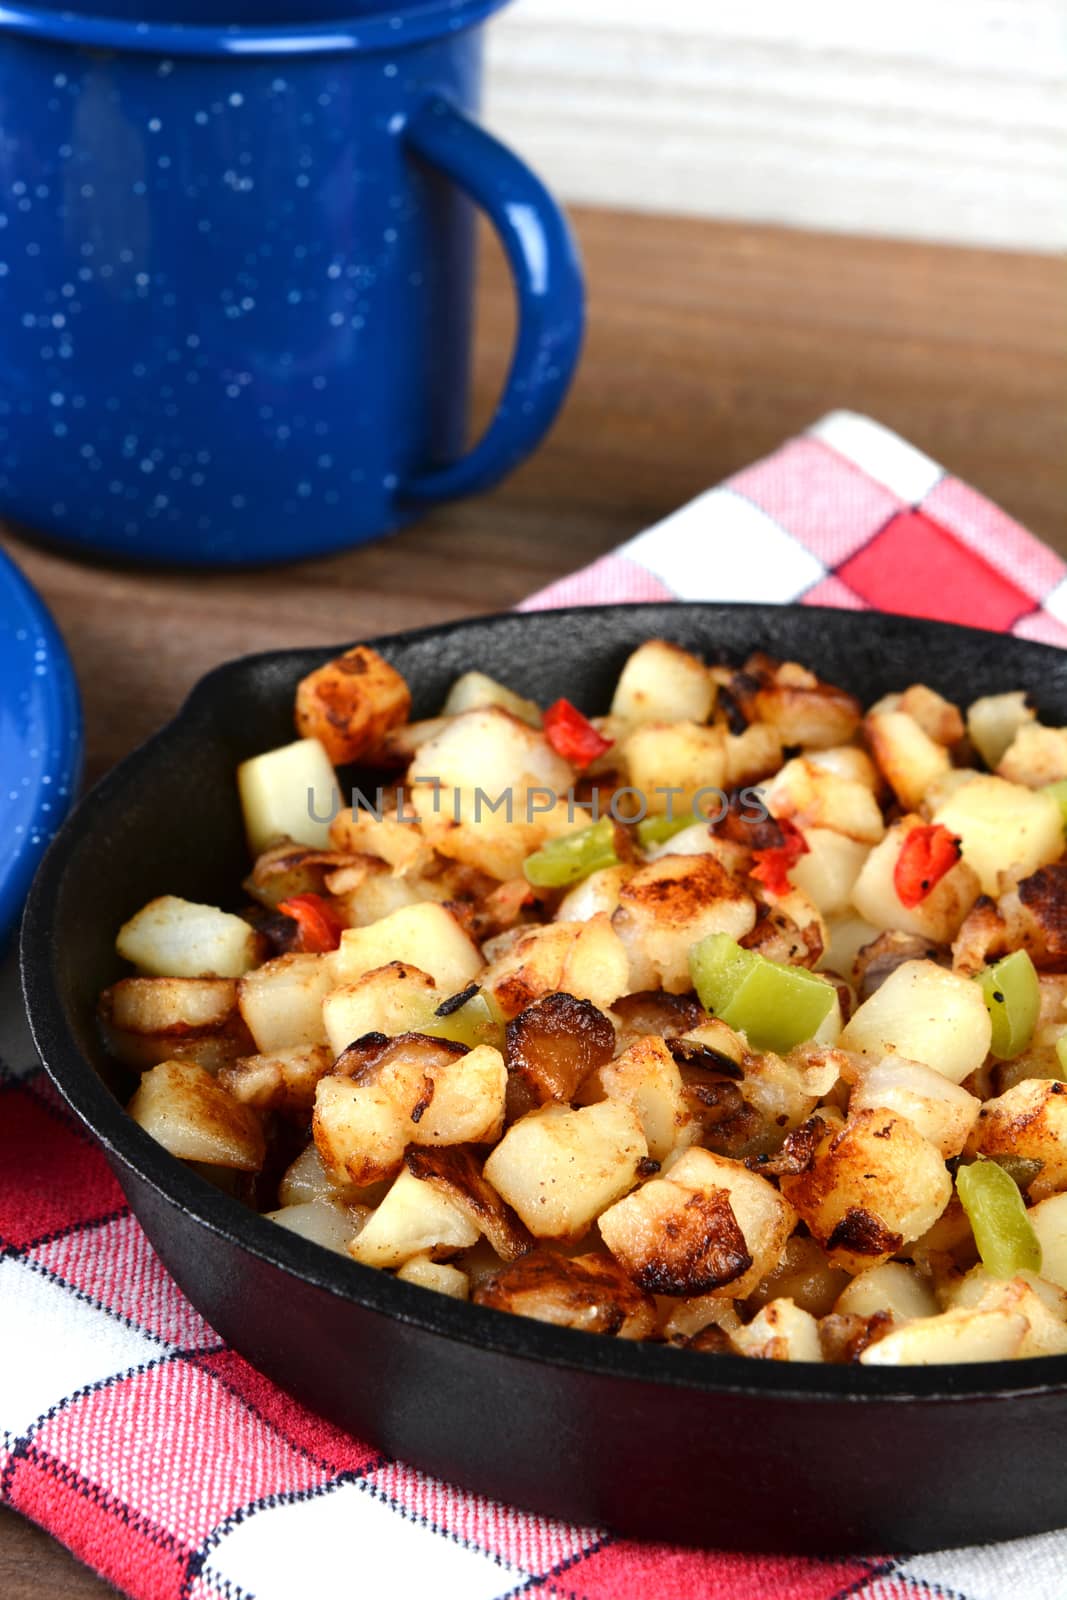 Closeup of a cast iron skillet full of breakfast potatoes. Vertical format with shallow depth of field.